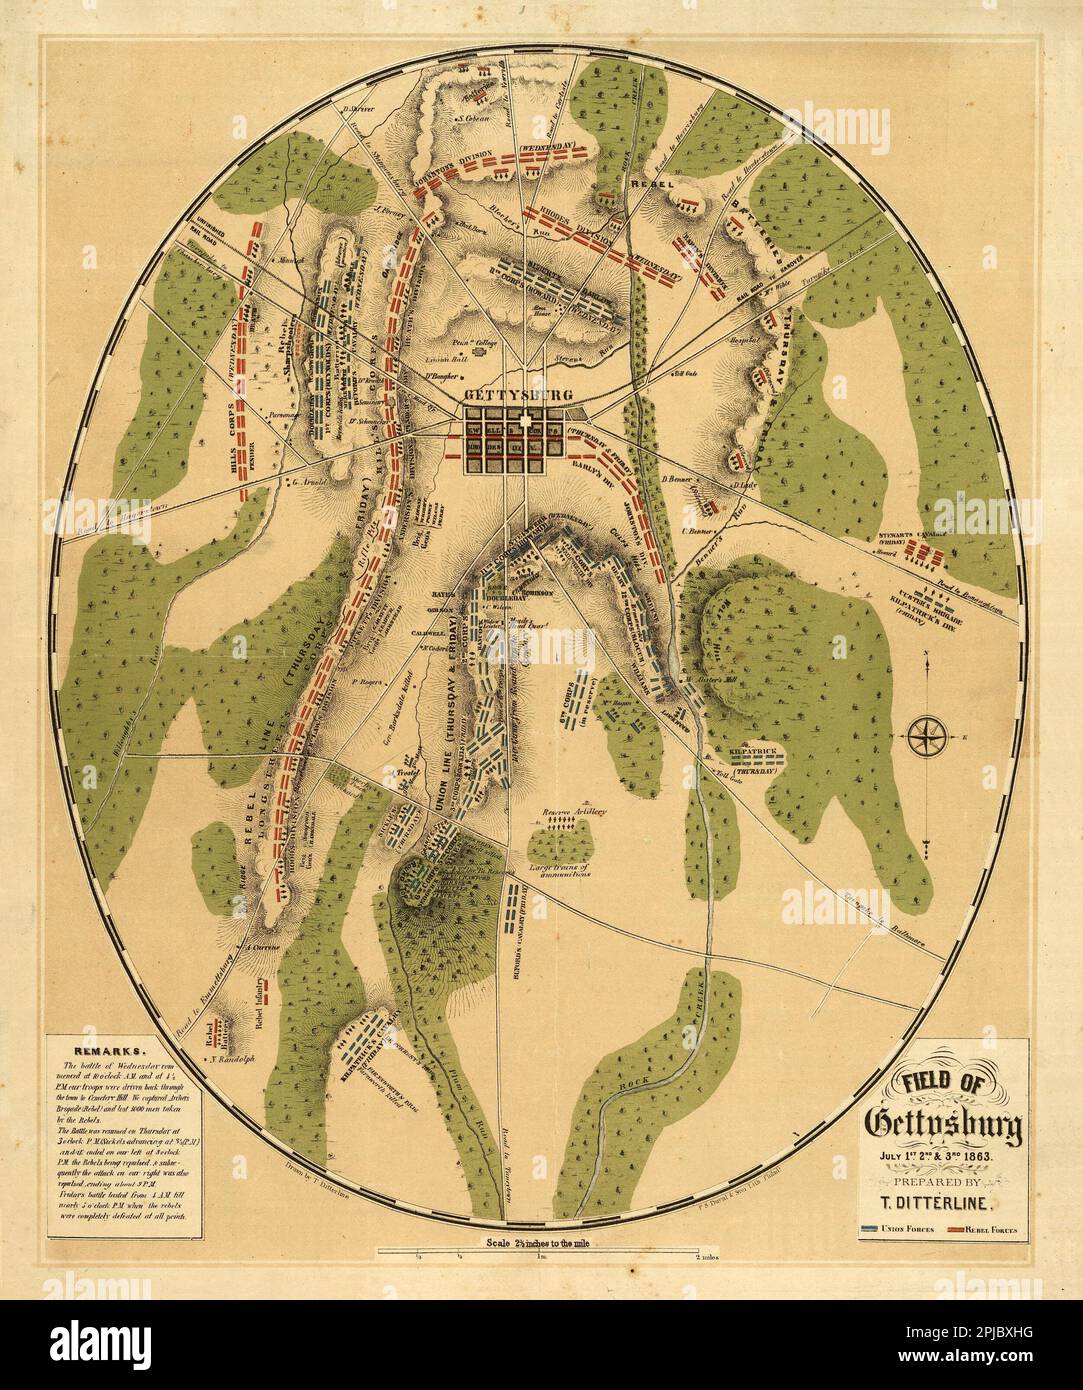 A map of the Battle of Gettysburg. The Battle of Gettysberg represented the end of the Confederate troops northern movement and their defeat at Gettysburg is often seen as the turning point of the war. The battle saw 200,000 men meet in combat, with a combined death count of 8000. Stock Photo